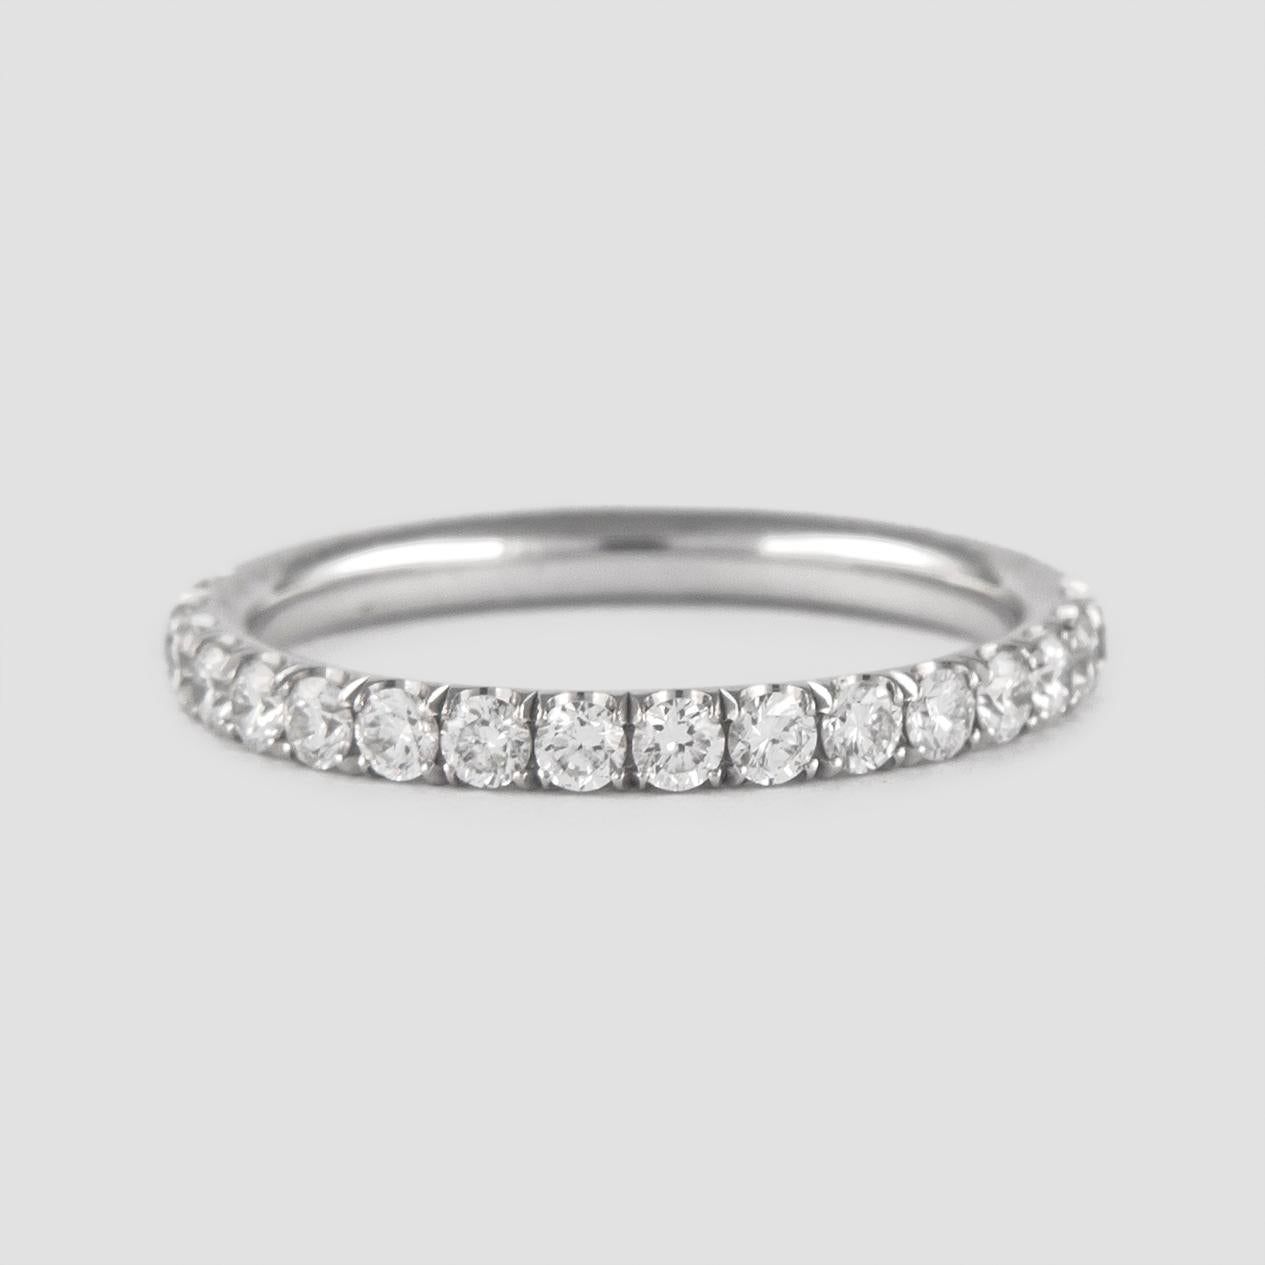 EGL 3.99 Carat Emerald Cut Diamond Ring with an Eternity Band 18k White Gold 1